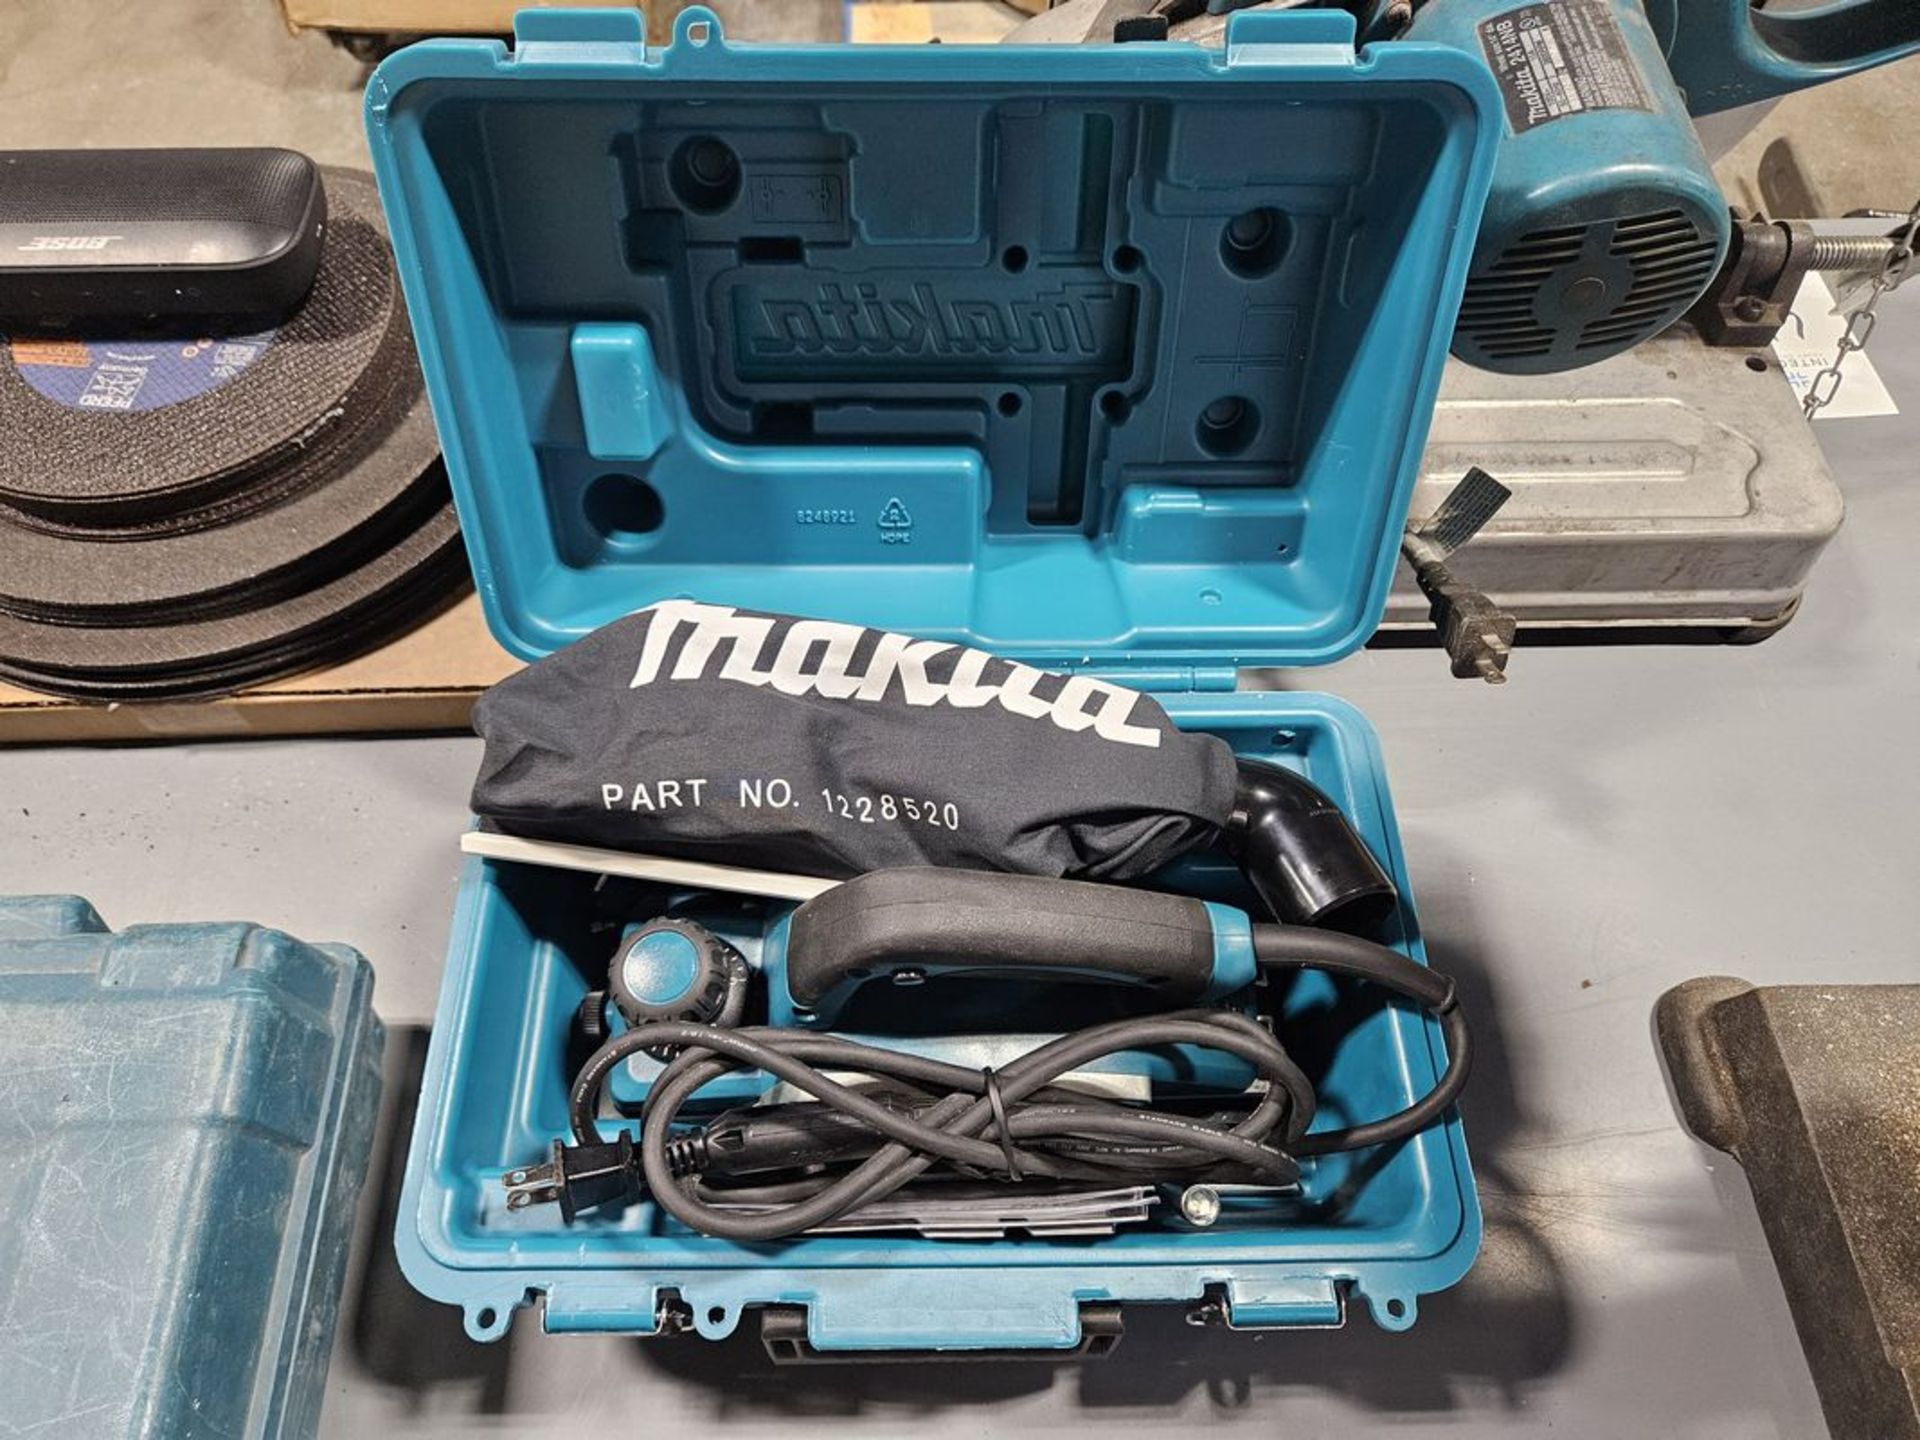 Makita #KP0800 3.25" Corded Planer w/ Case - Image 3 of 3